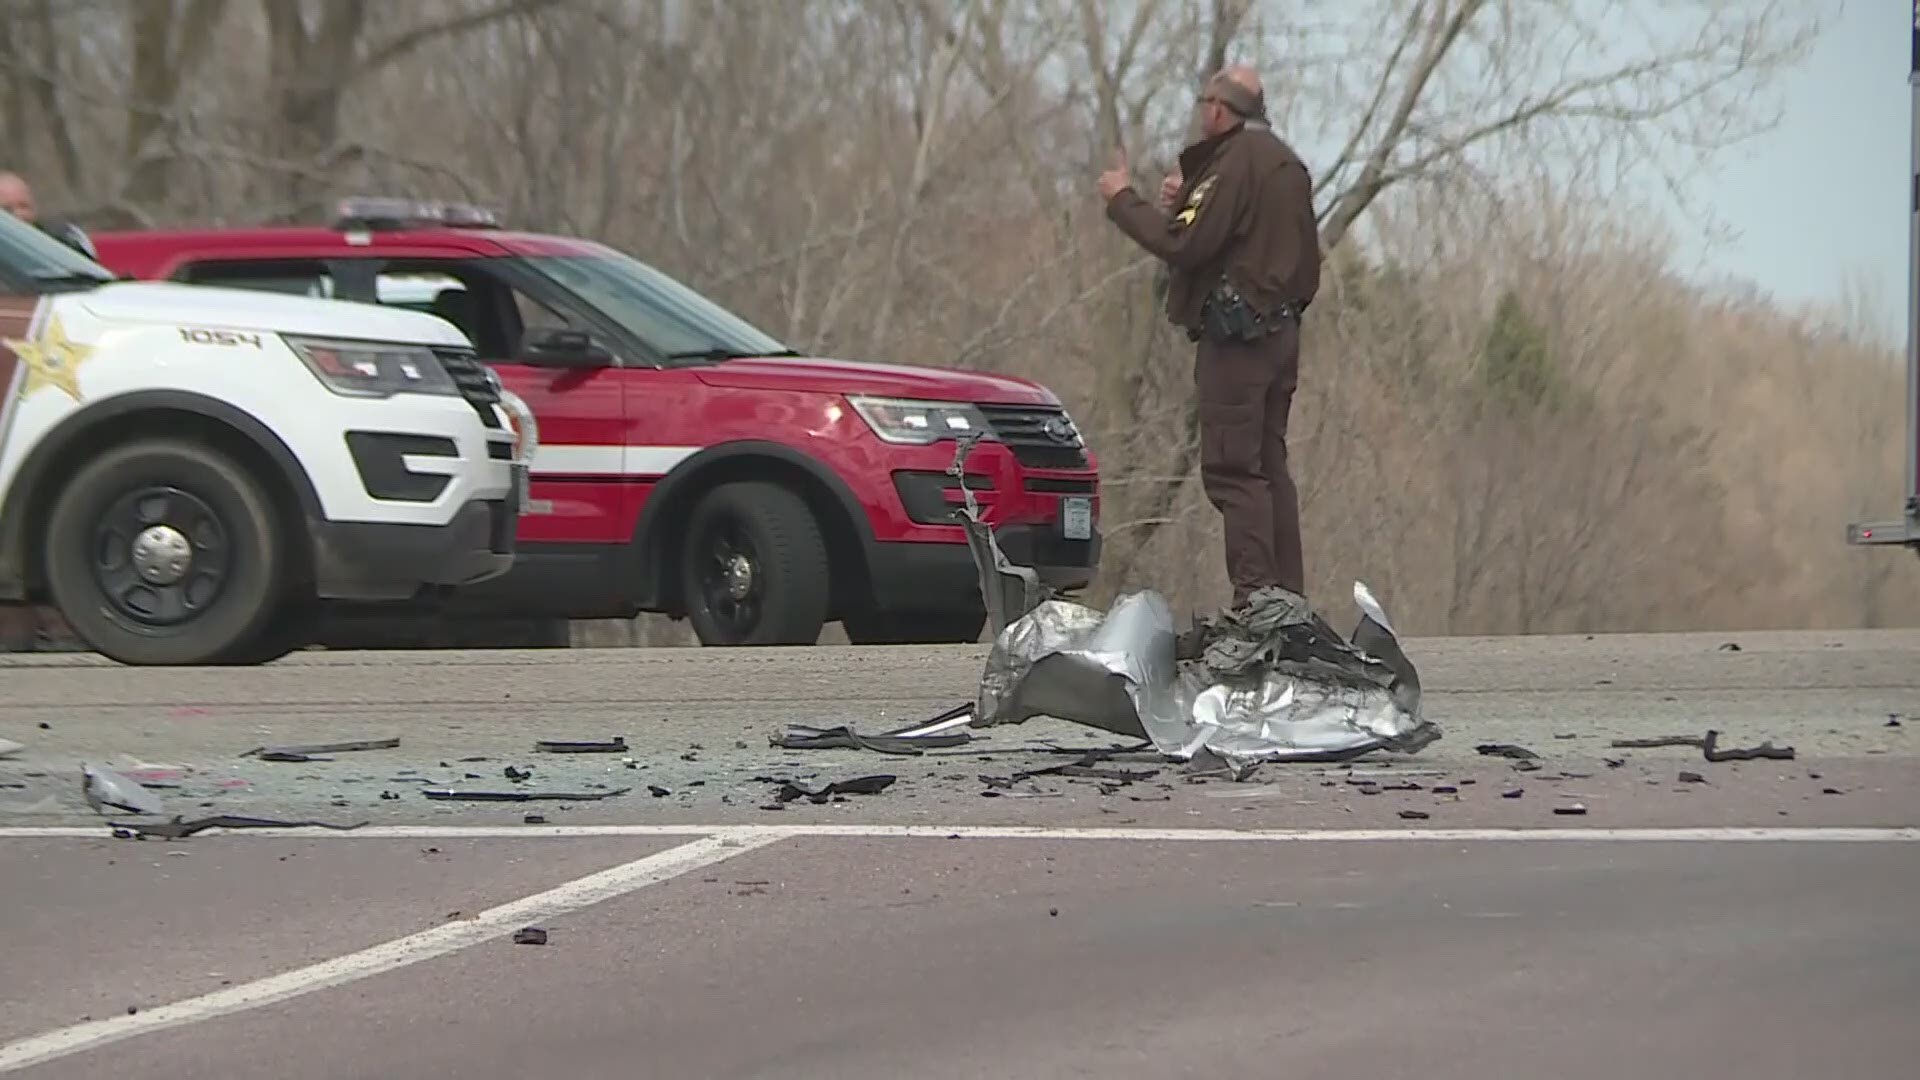 Law enforcement officials say speeding is the most frequent cause for the spike in crashes